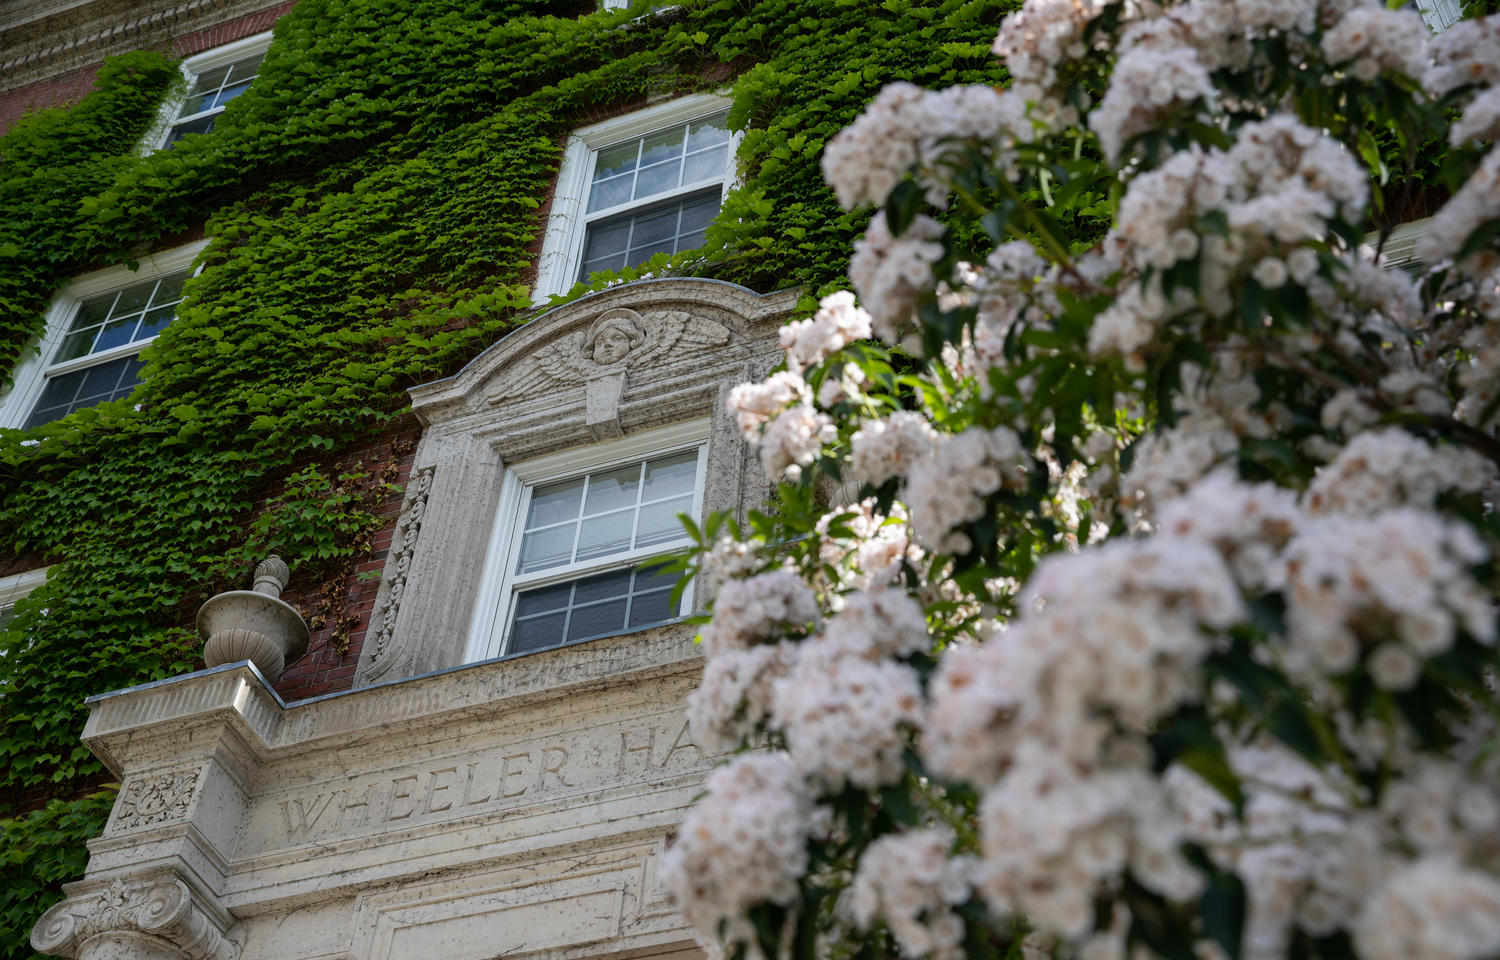 White flowers in the foreground with Wheeler Hall engraved in cement at dorm's entrance